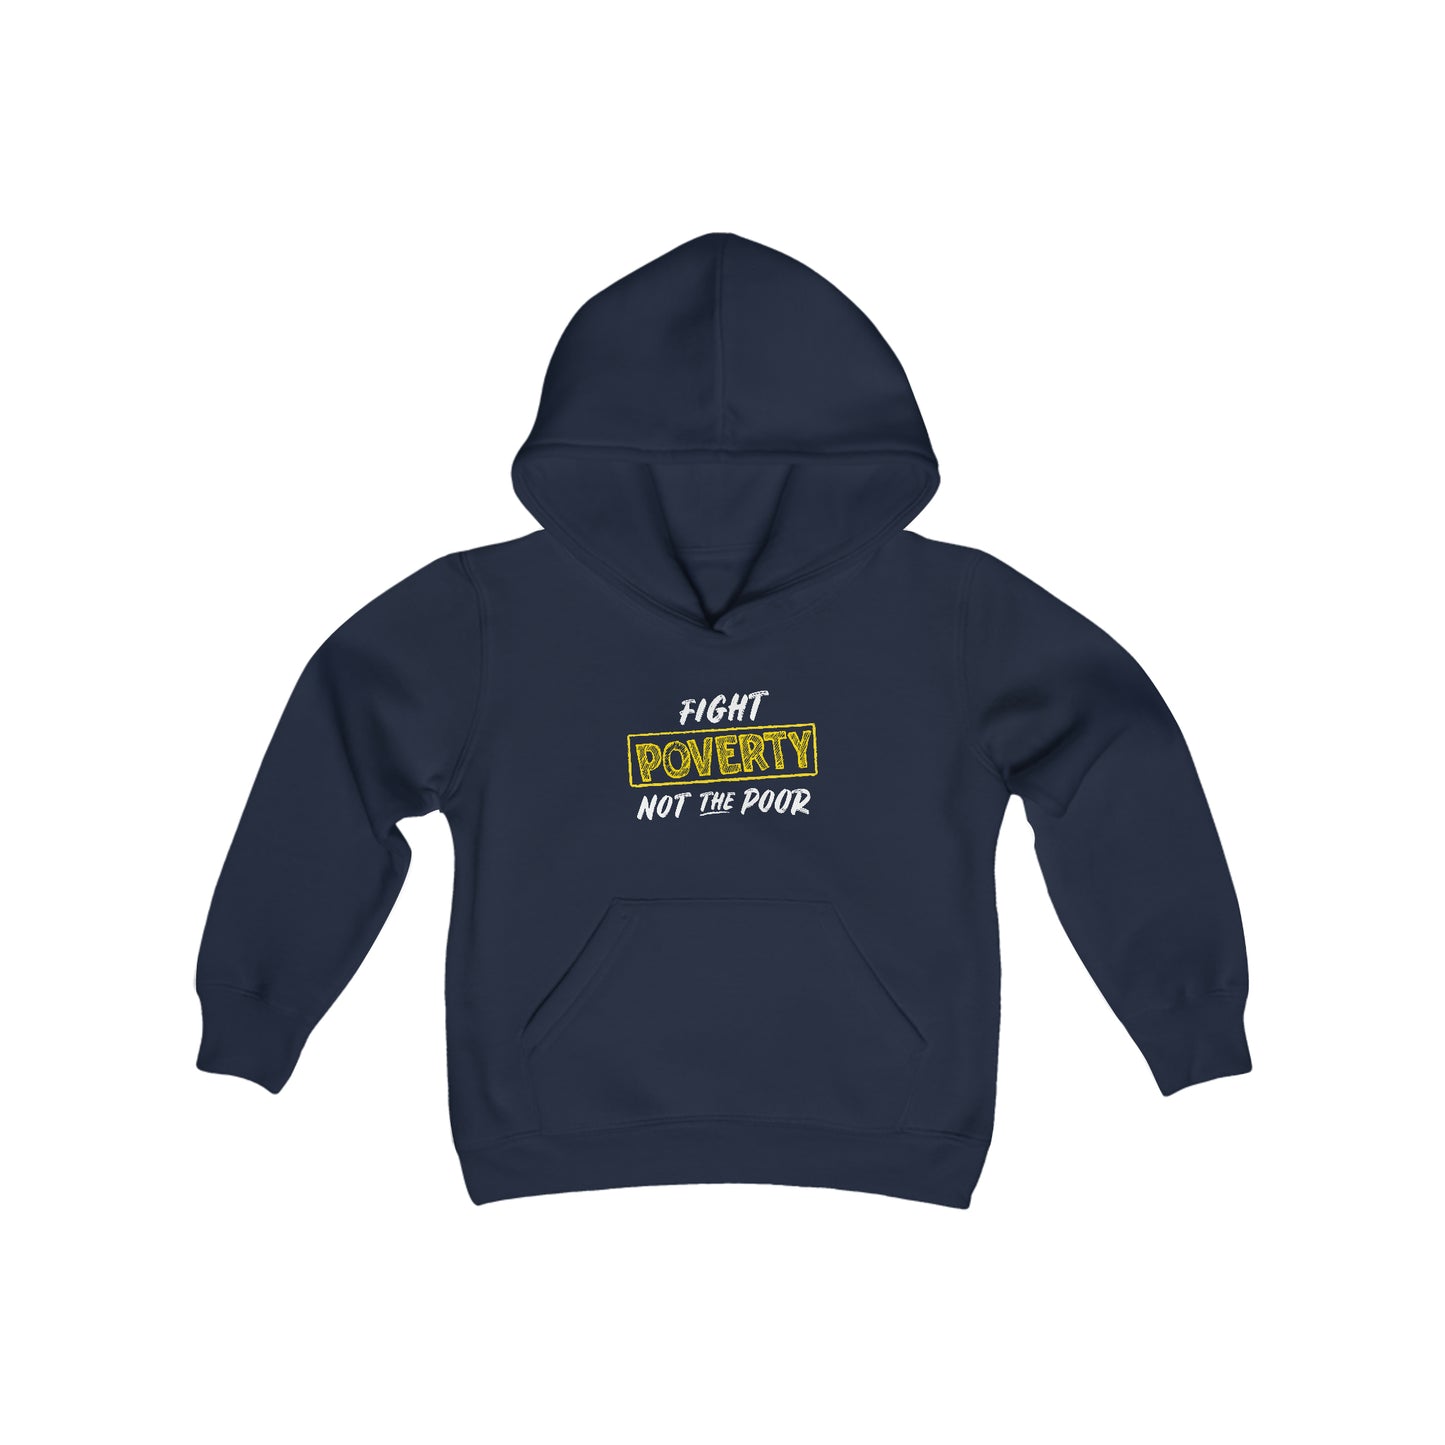 “Fight Poverty Not The Poor” Youth Hoodie